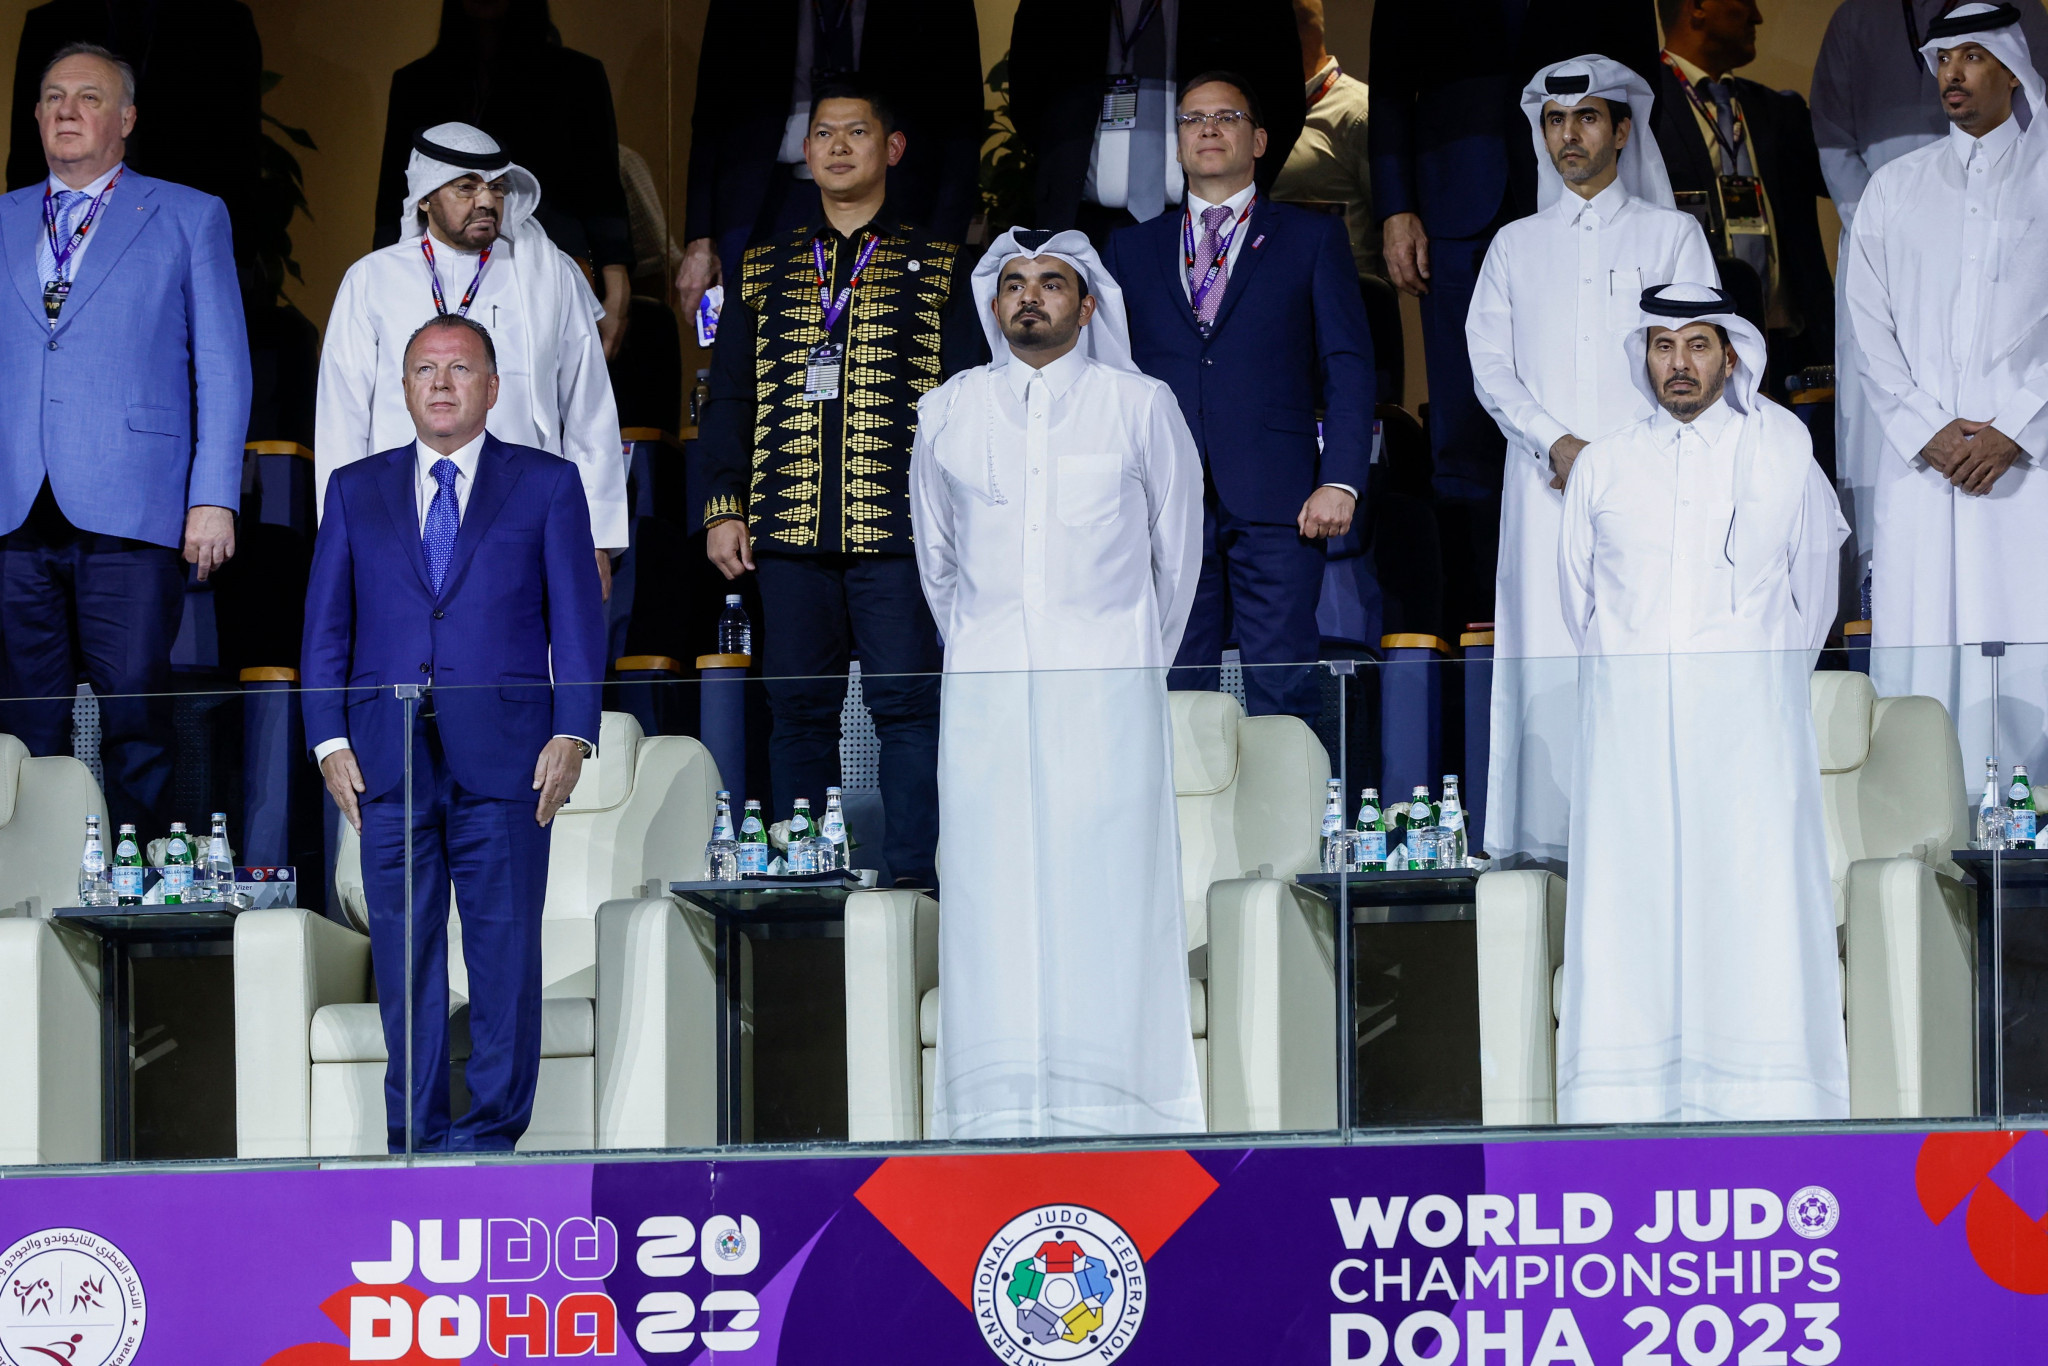 IJF President Vizer pushes for Doha to host Olympic Games "soon"